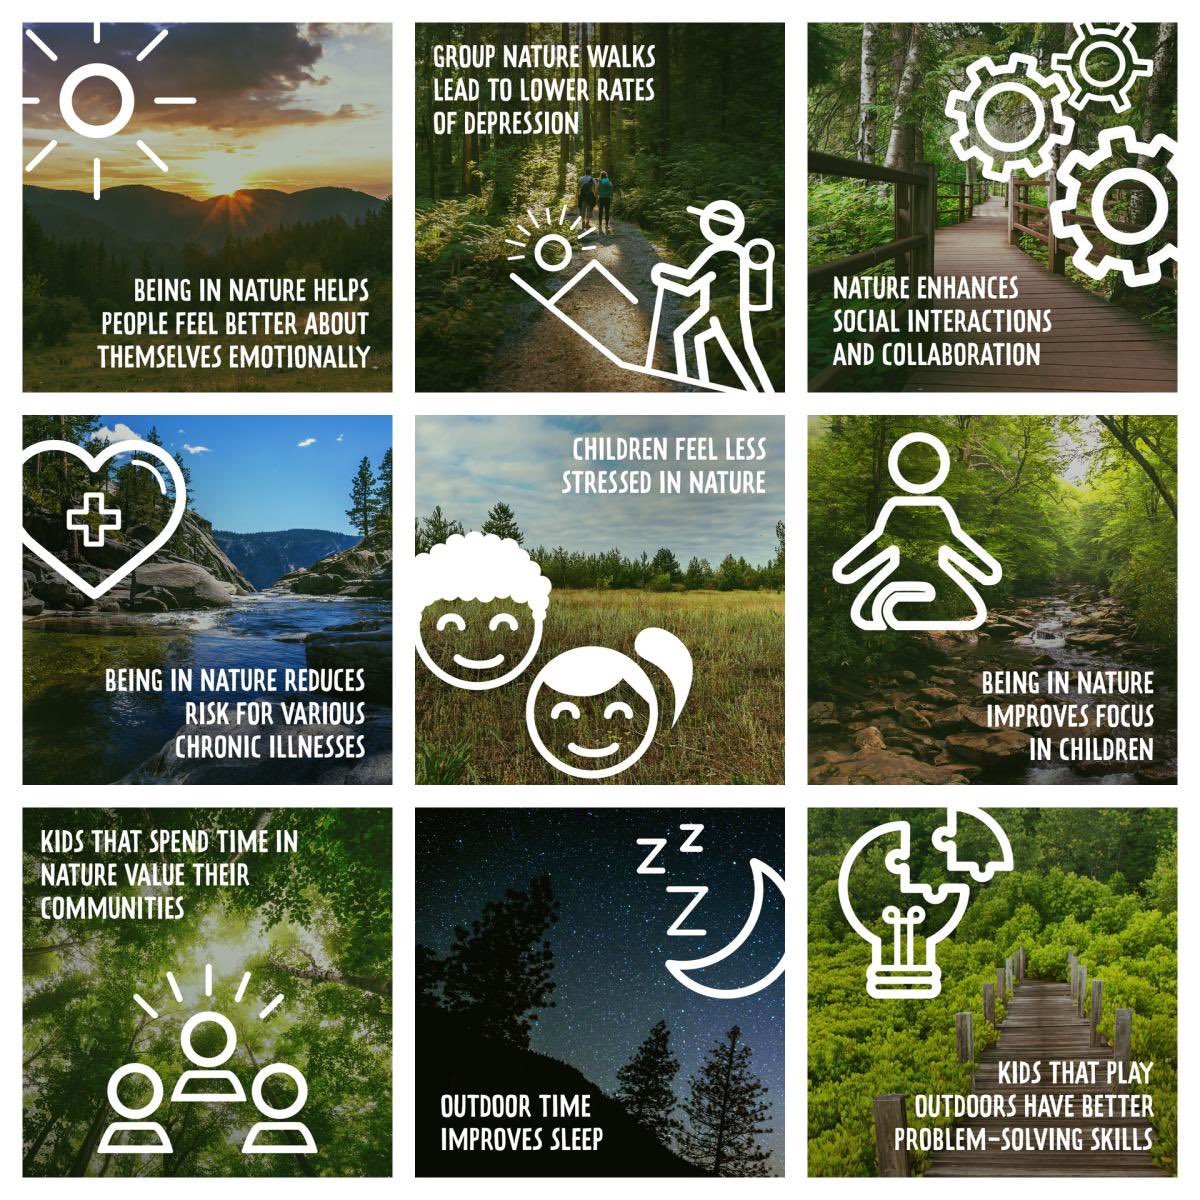 Happy Earth Day! 🌎 Today, we hope you take some time outside to learn, play, explore, reflect, or rest. Here are just a small handful of the many benefits found after being immersed in the outdoors. What's your favourite side effect of stepping beyond four walls?